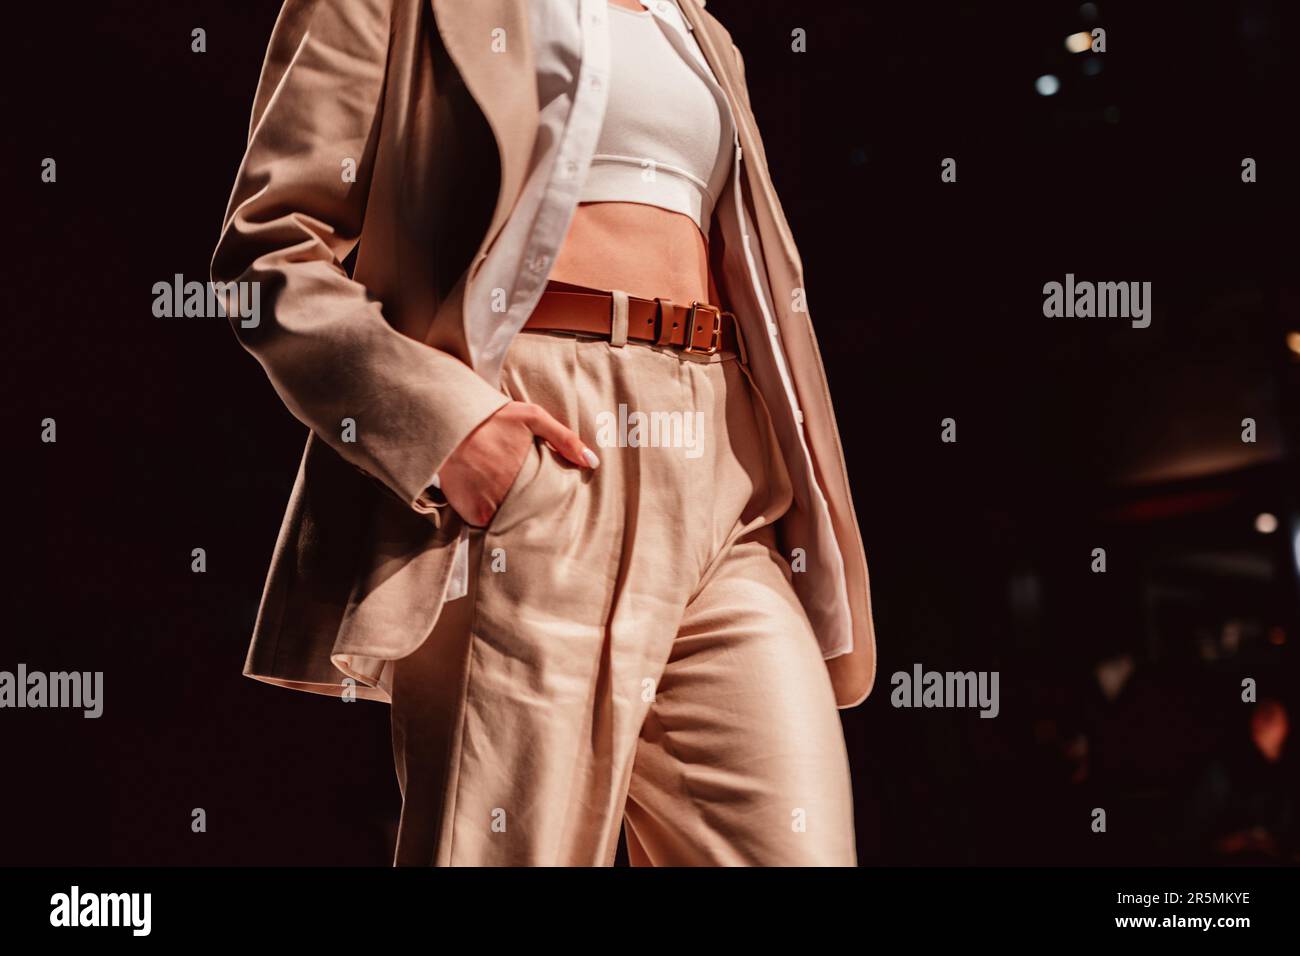 Fancy details of stylish neutral beige outfit, classy jacket, pants with leather brown belt. Cloth unisex concept Stock Photo